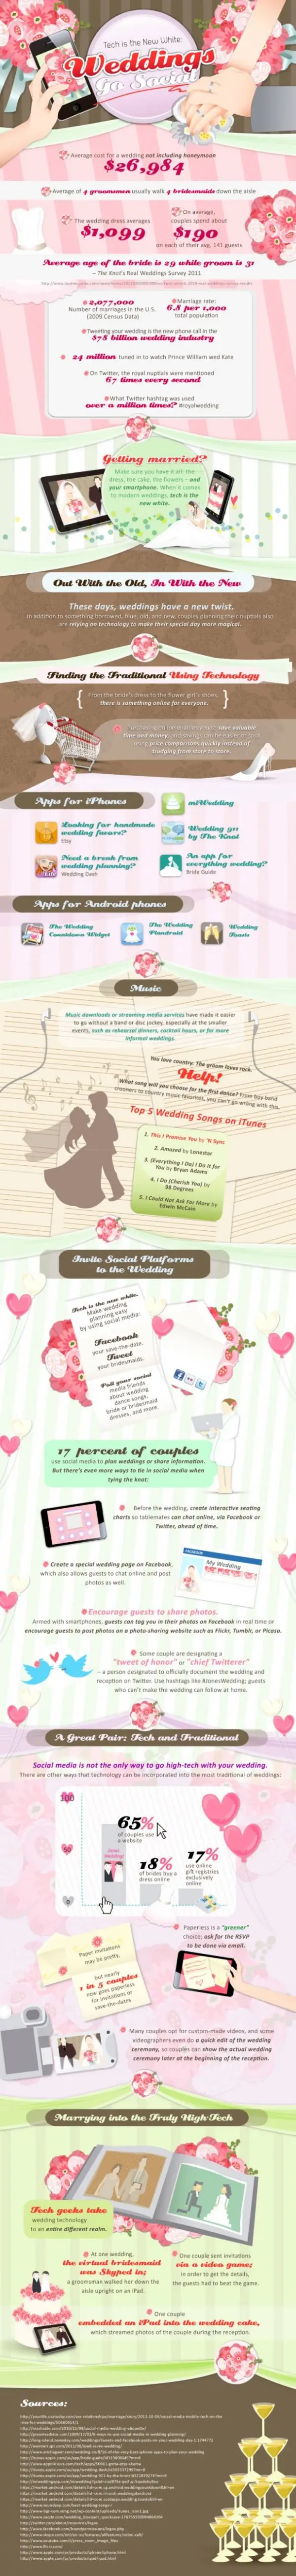 The Best Wedding Infographic Ever!